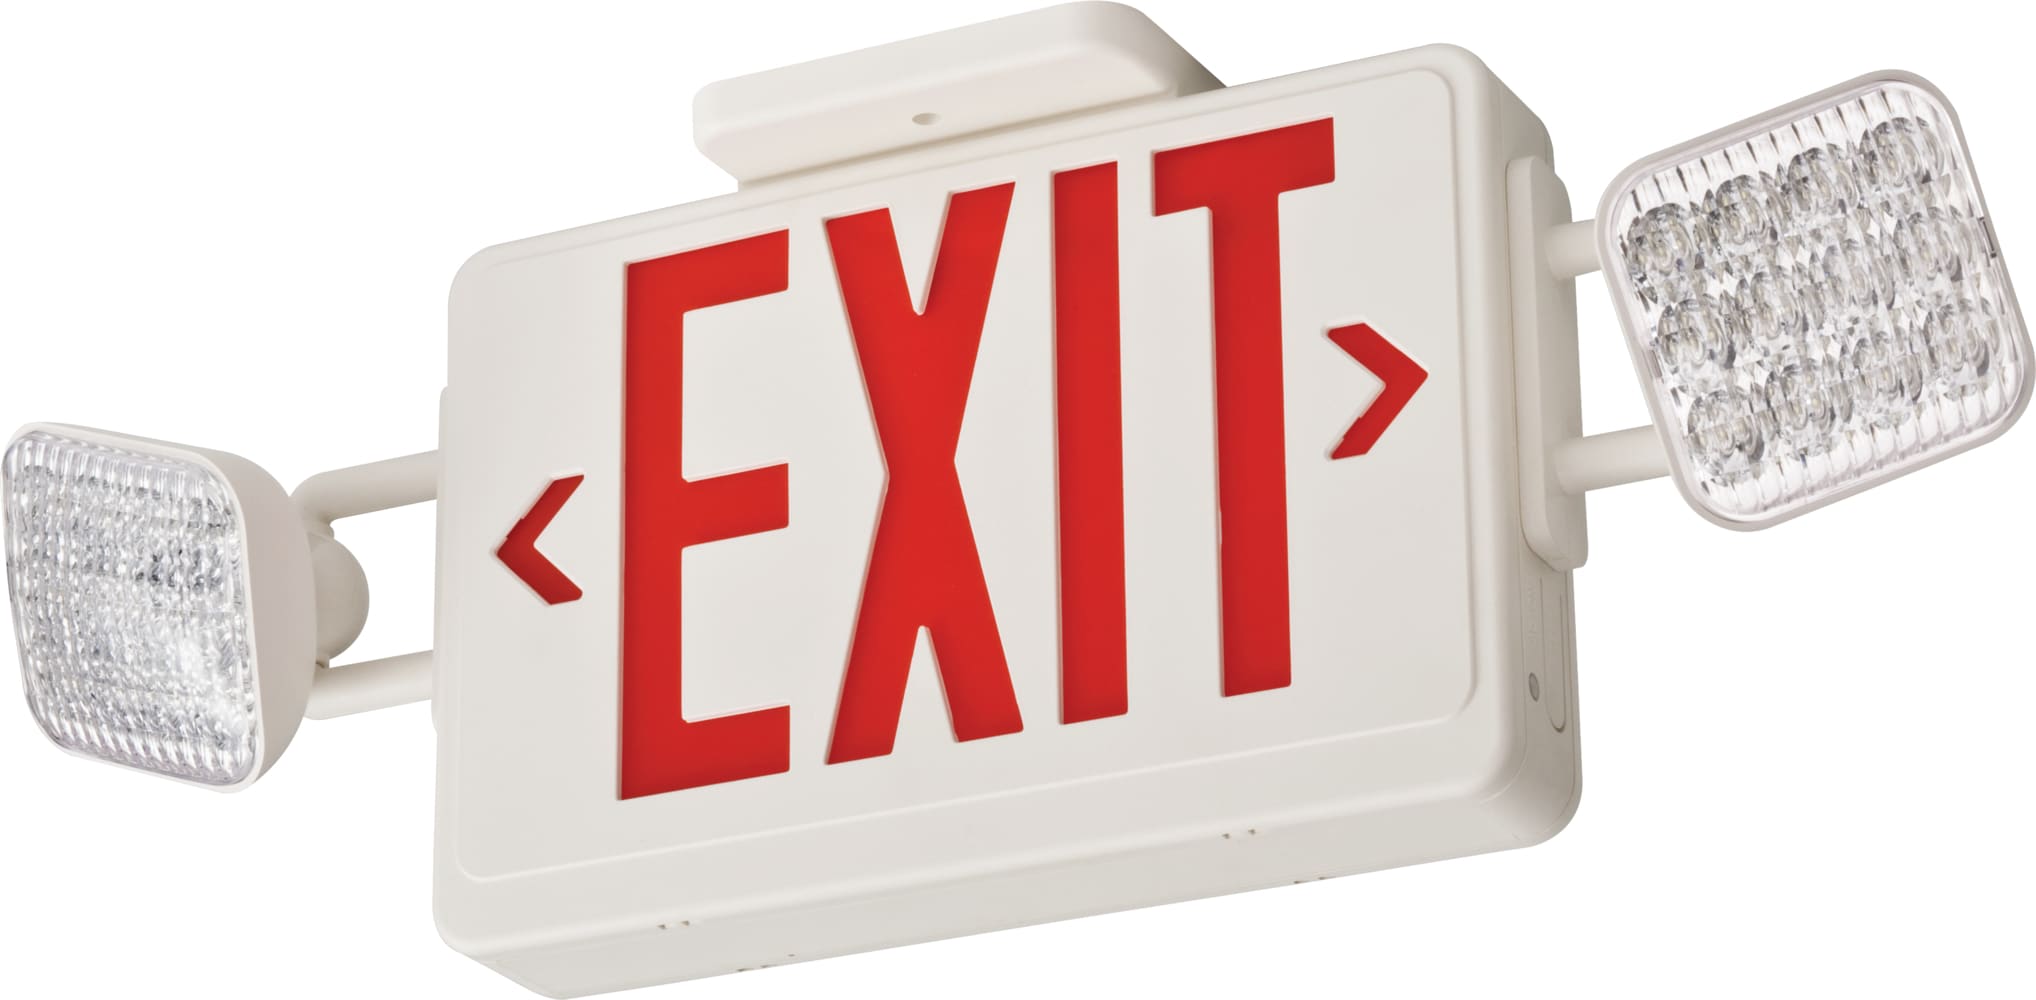 LITHONIA LIGHTING EXR ACUITY LITHONIA Thermoplastic LED Exit Sign 